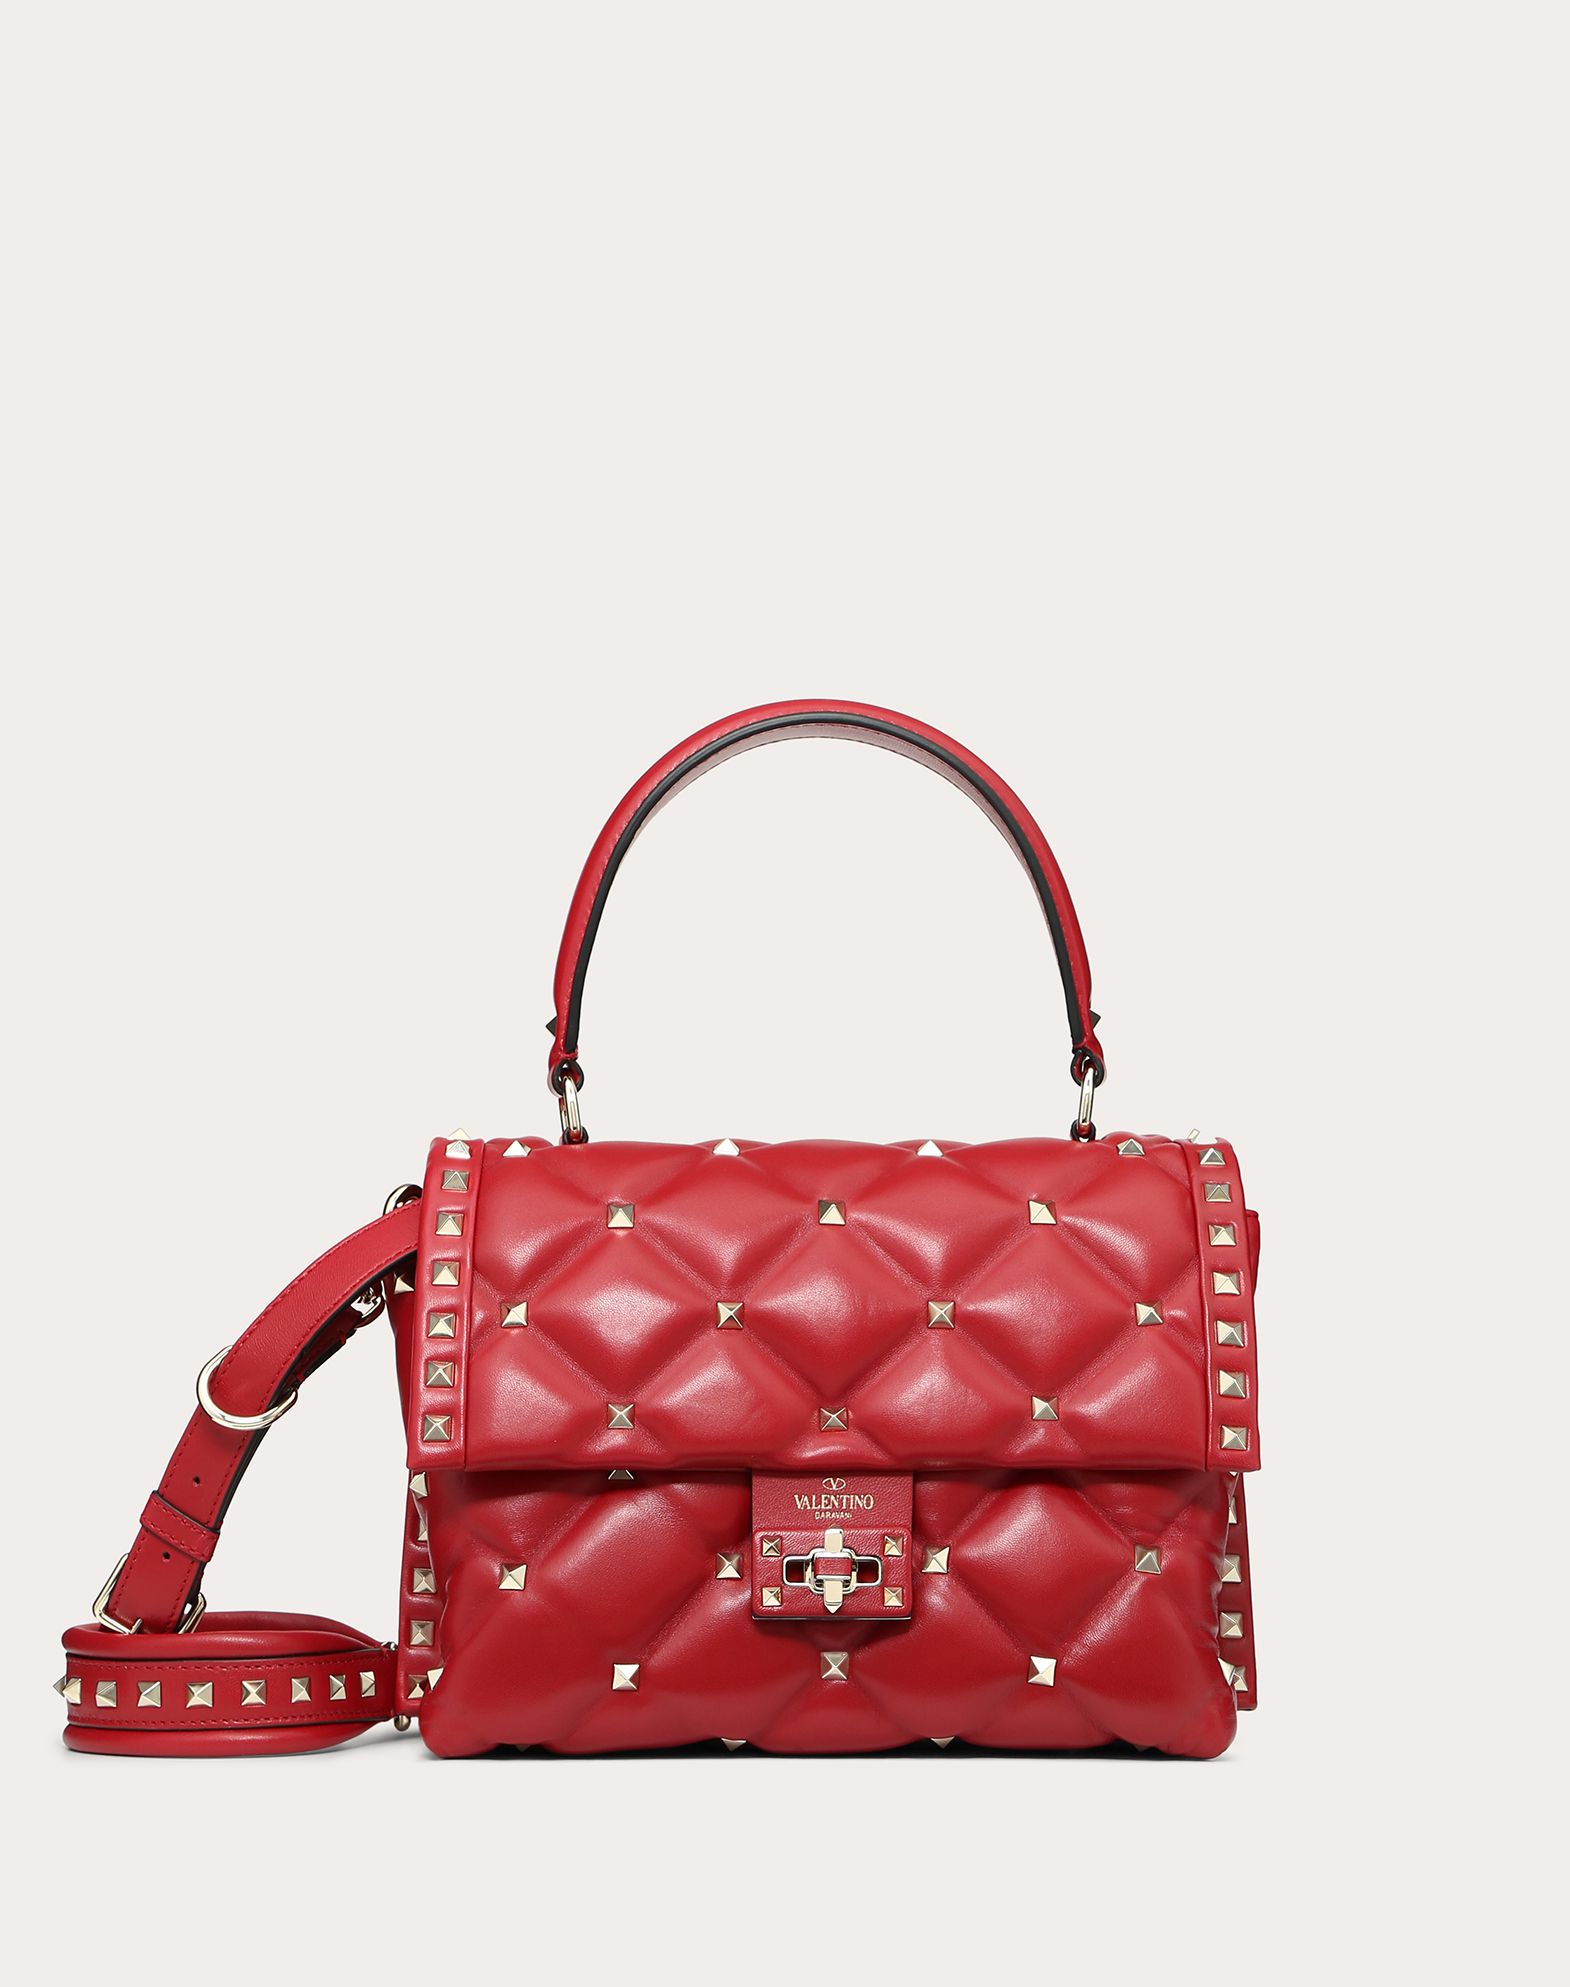 Valentino By Valentino Bag on Sale, 58% OFF | lagence.tv